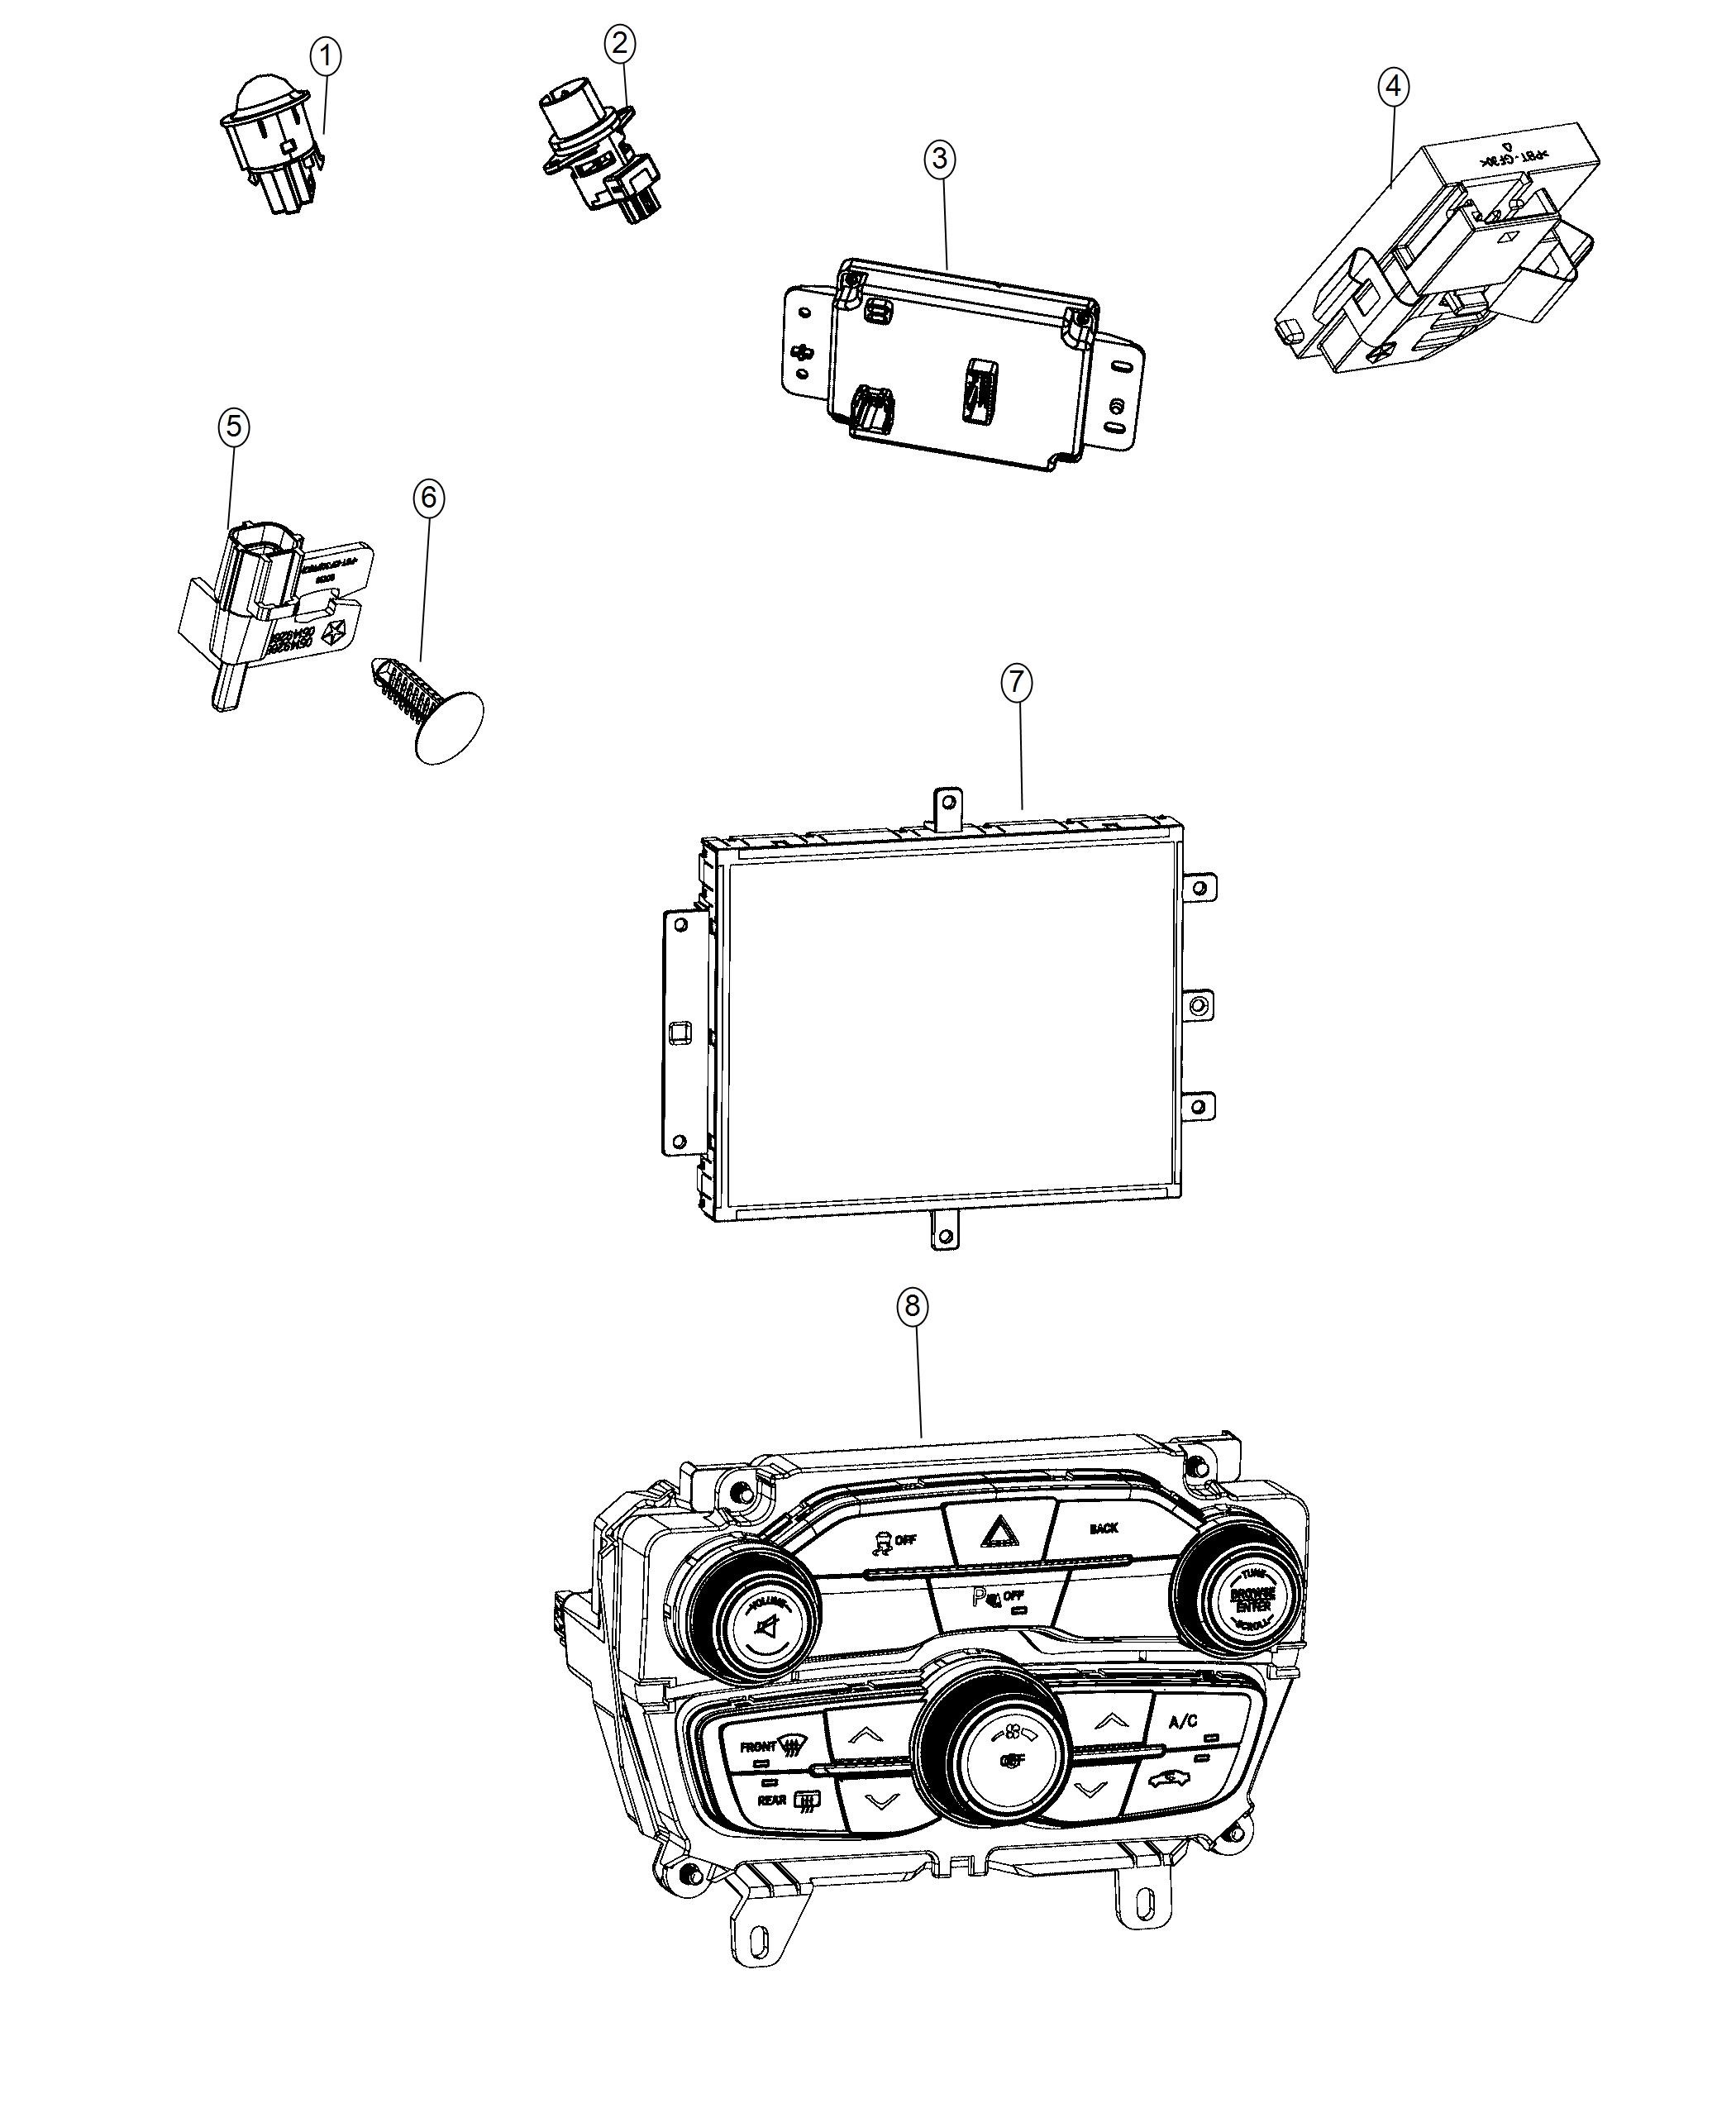 A/C And Heater Controls. Diagram